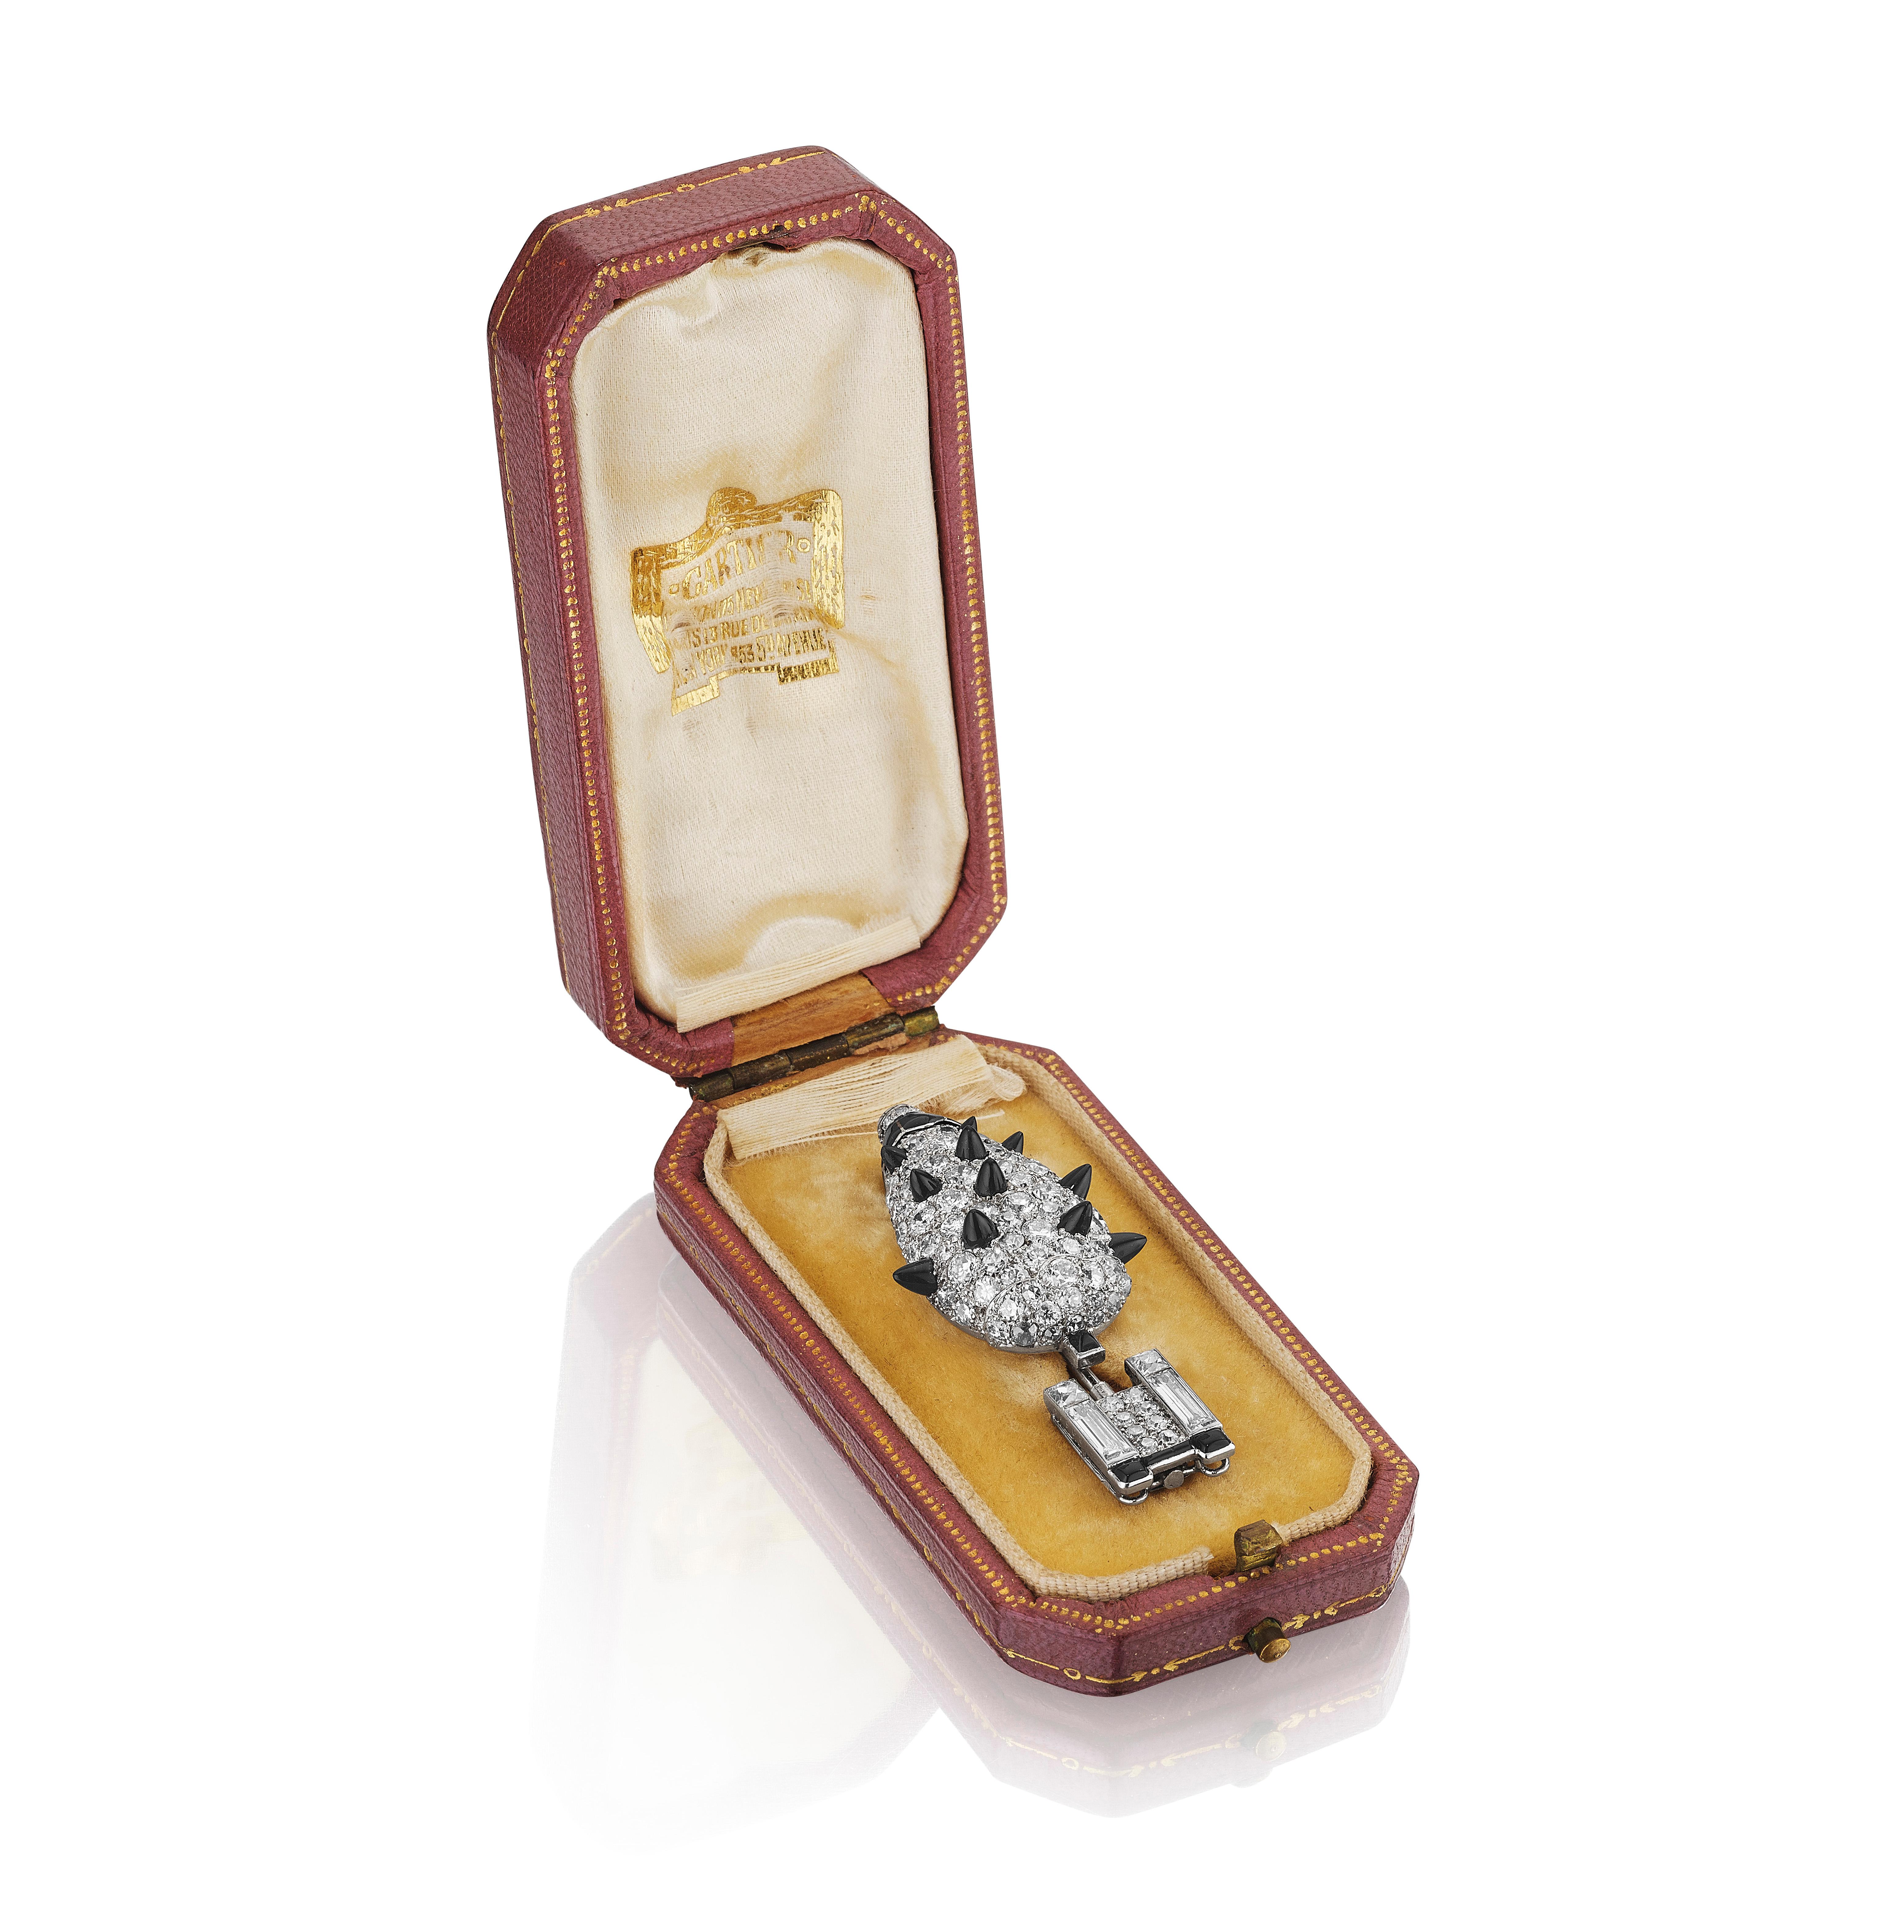 A brooch designed as a potted topiary set throughout with European-cut diamonds, interspersed with French-, baguette-, and single-cut diamonds, accented with black onyx detailing, completed with black enamel accents and a reverse-set diamond at the